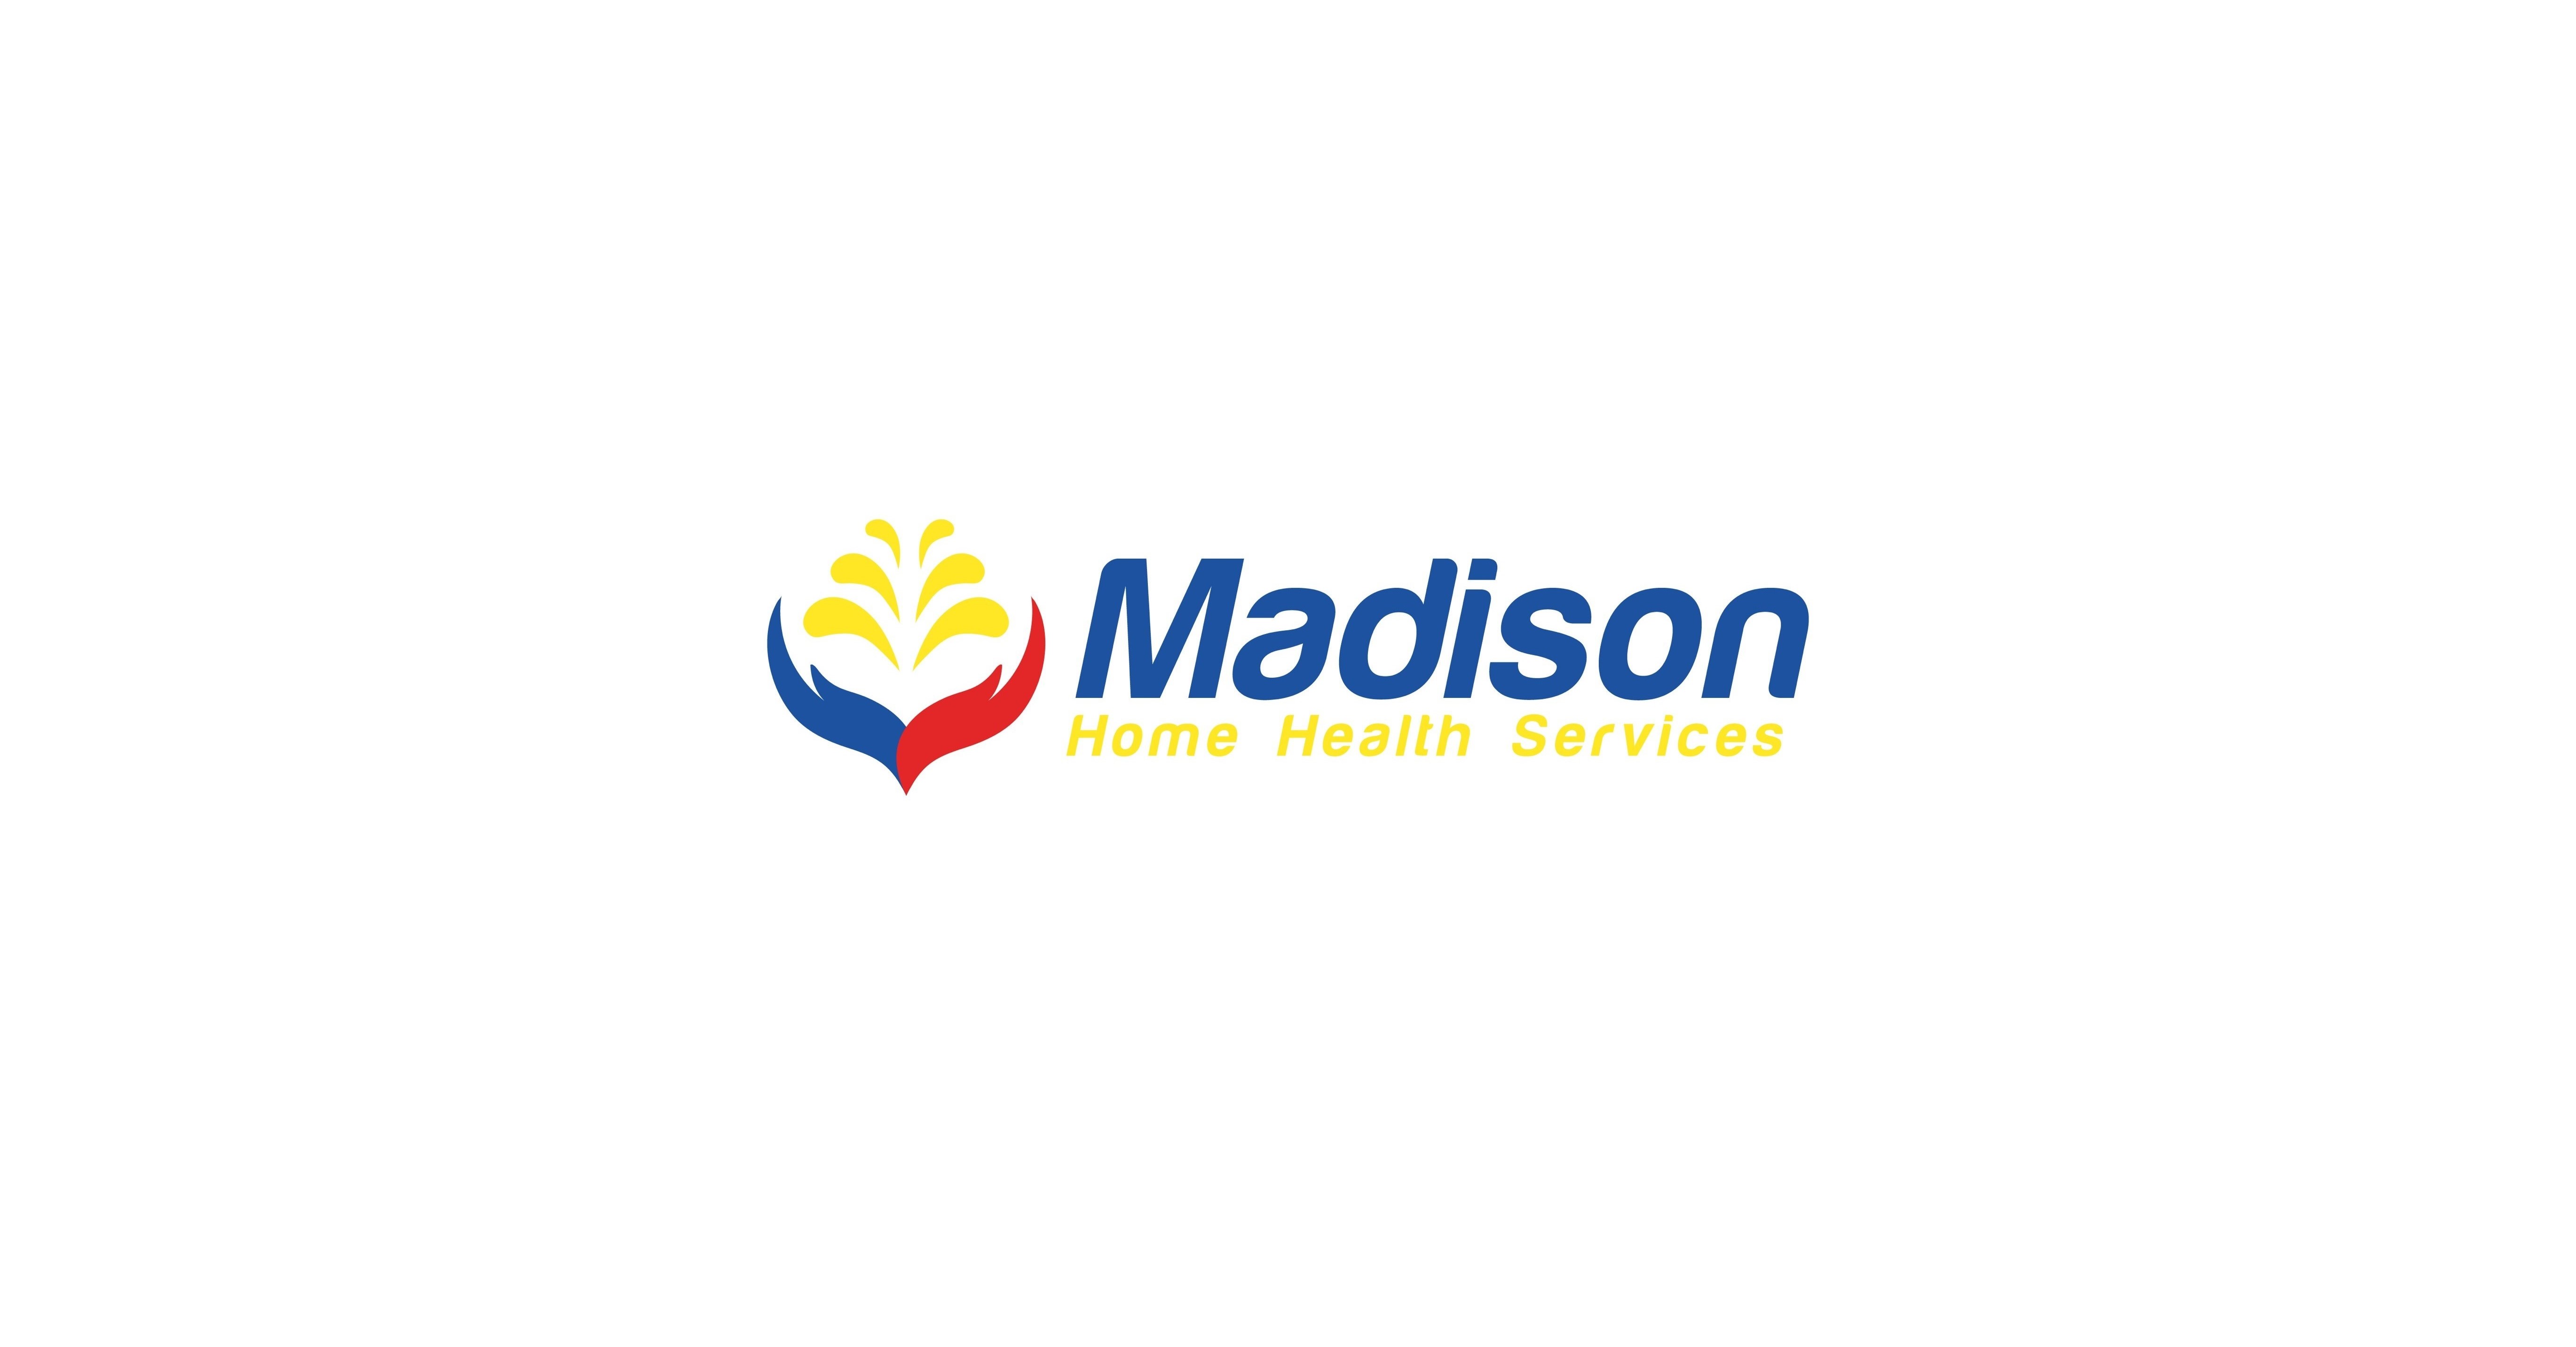 Madison Home Health Services